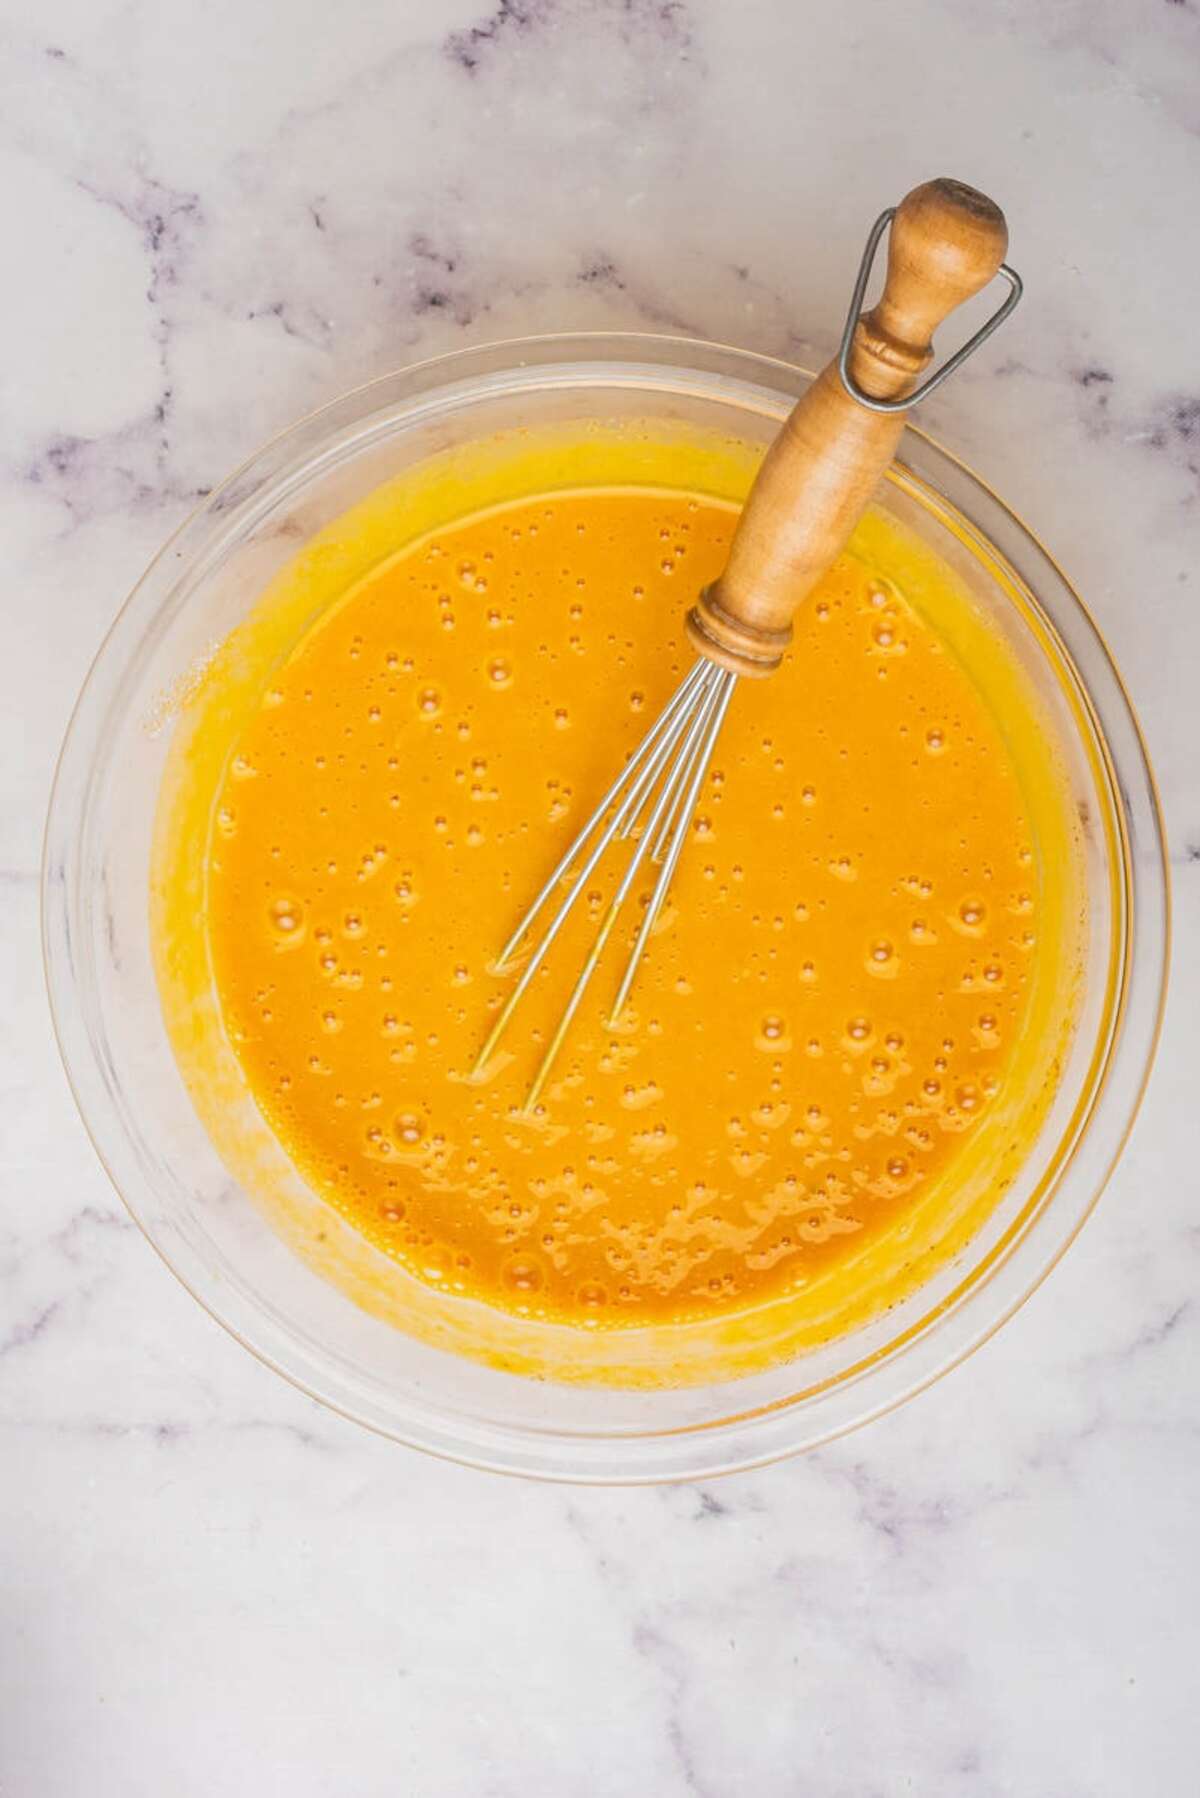 Whisking the pumpkin pie filling mixture in a glass bowl until smooth.